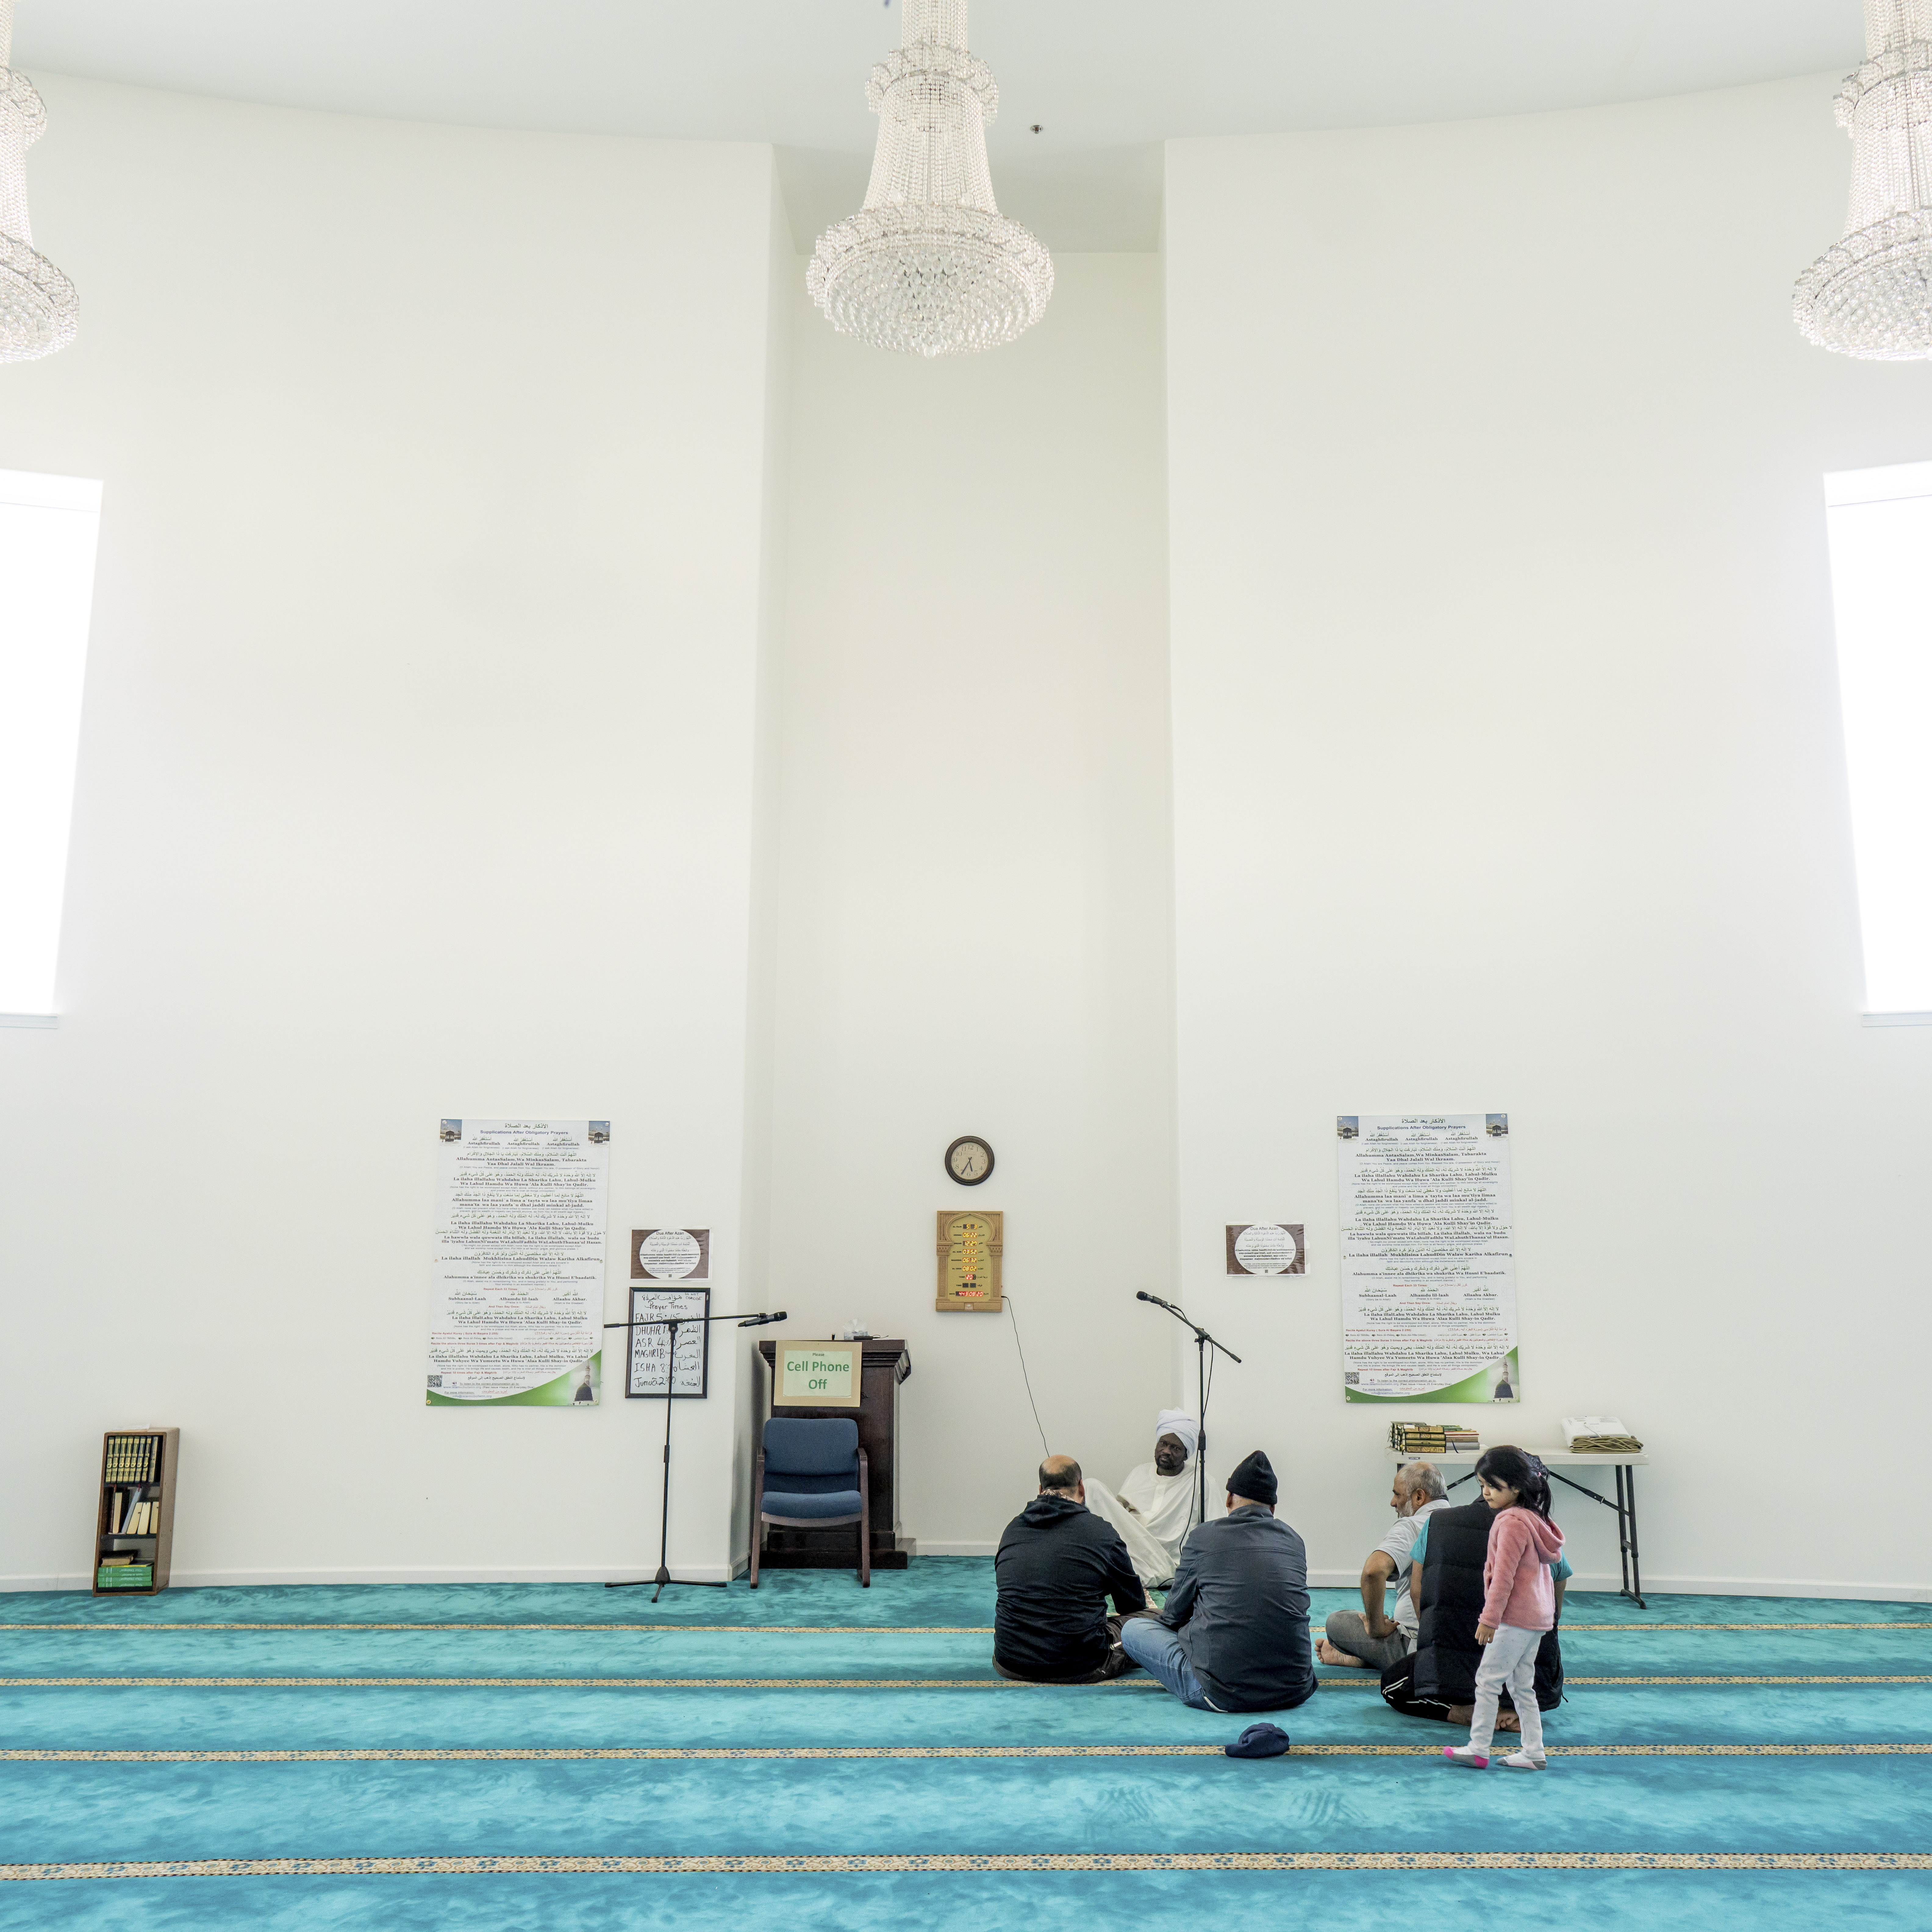 The new mosque makes room for a growing community of Muslims in the city.